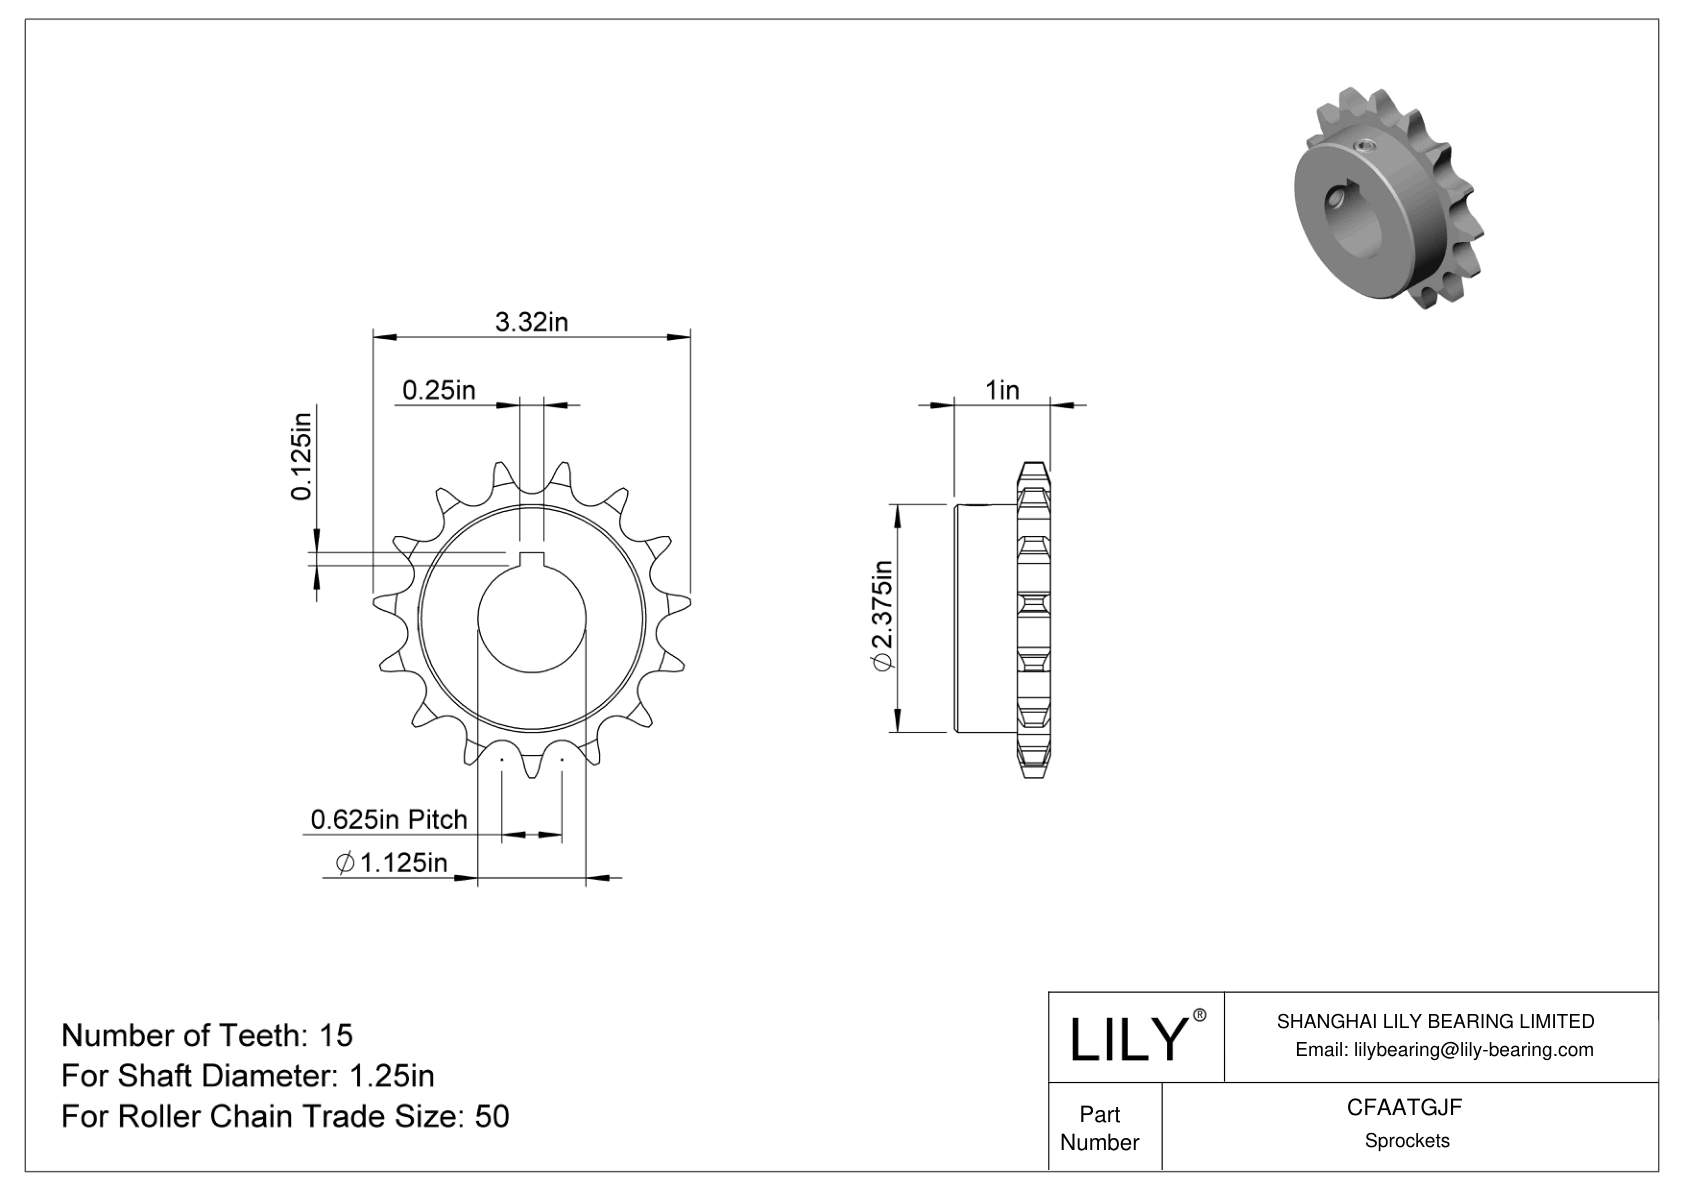 CFAATGJF Wear-Resistant Sprockets for ANSI Roller Chain cad drawing